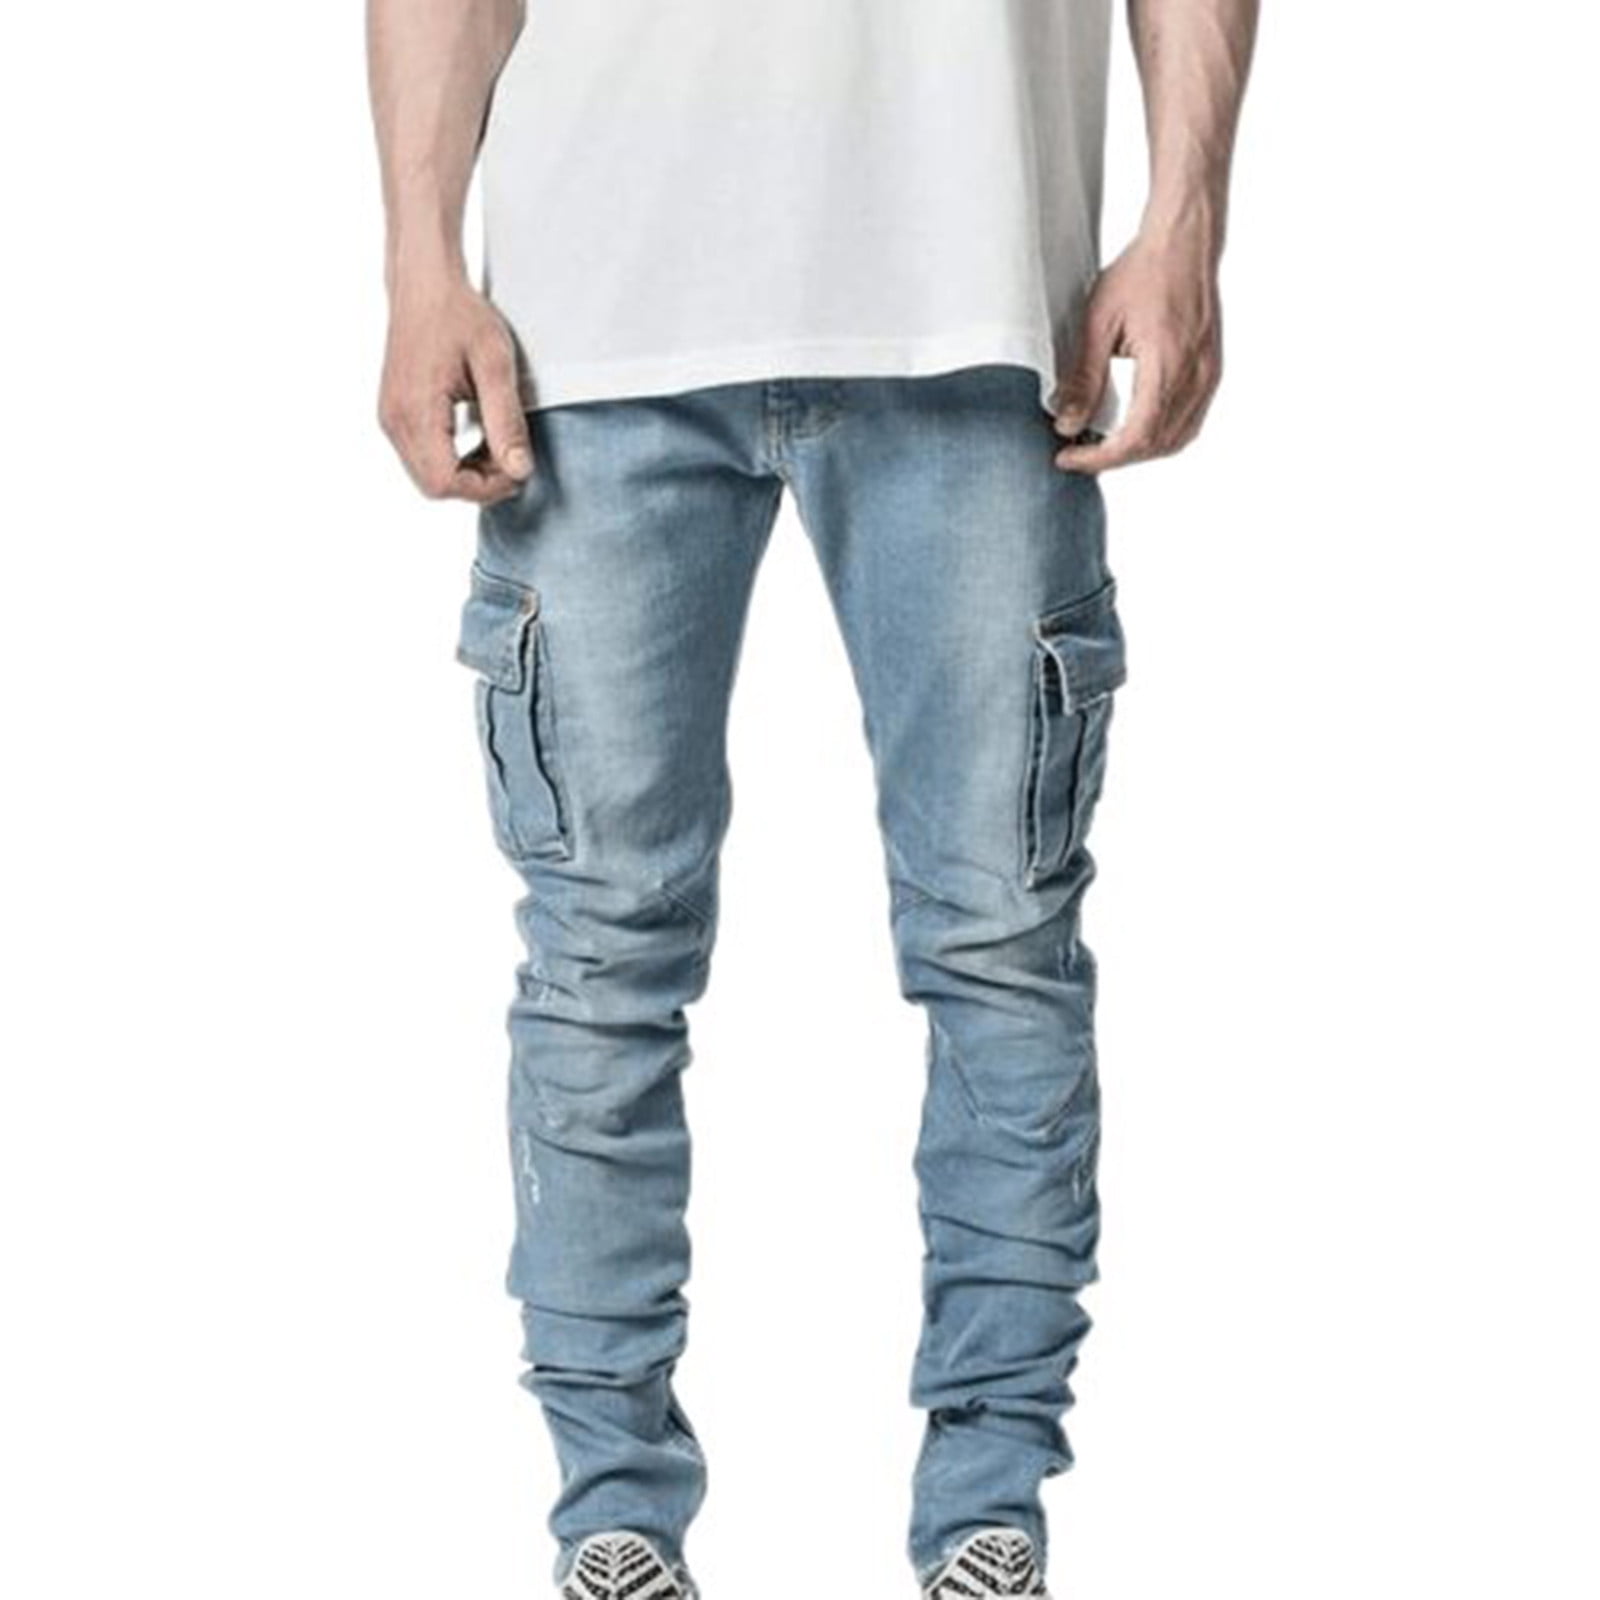 Men'S Side Pocket Trousers With Zipper Placket Skinny Jeans Mens Loose  Fitting Pants Trouser Casual Pants Blue S 